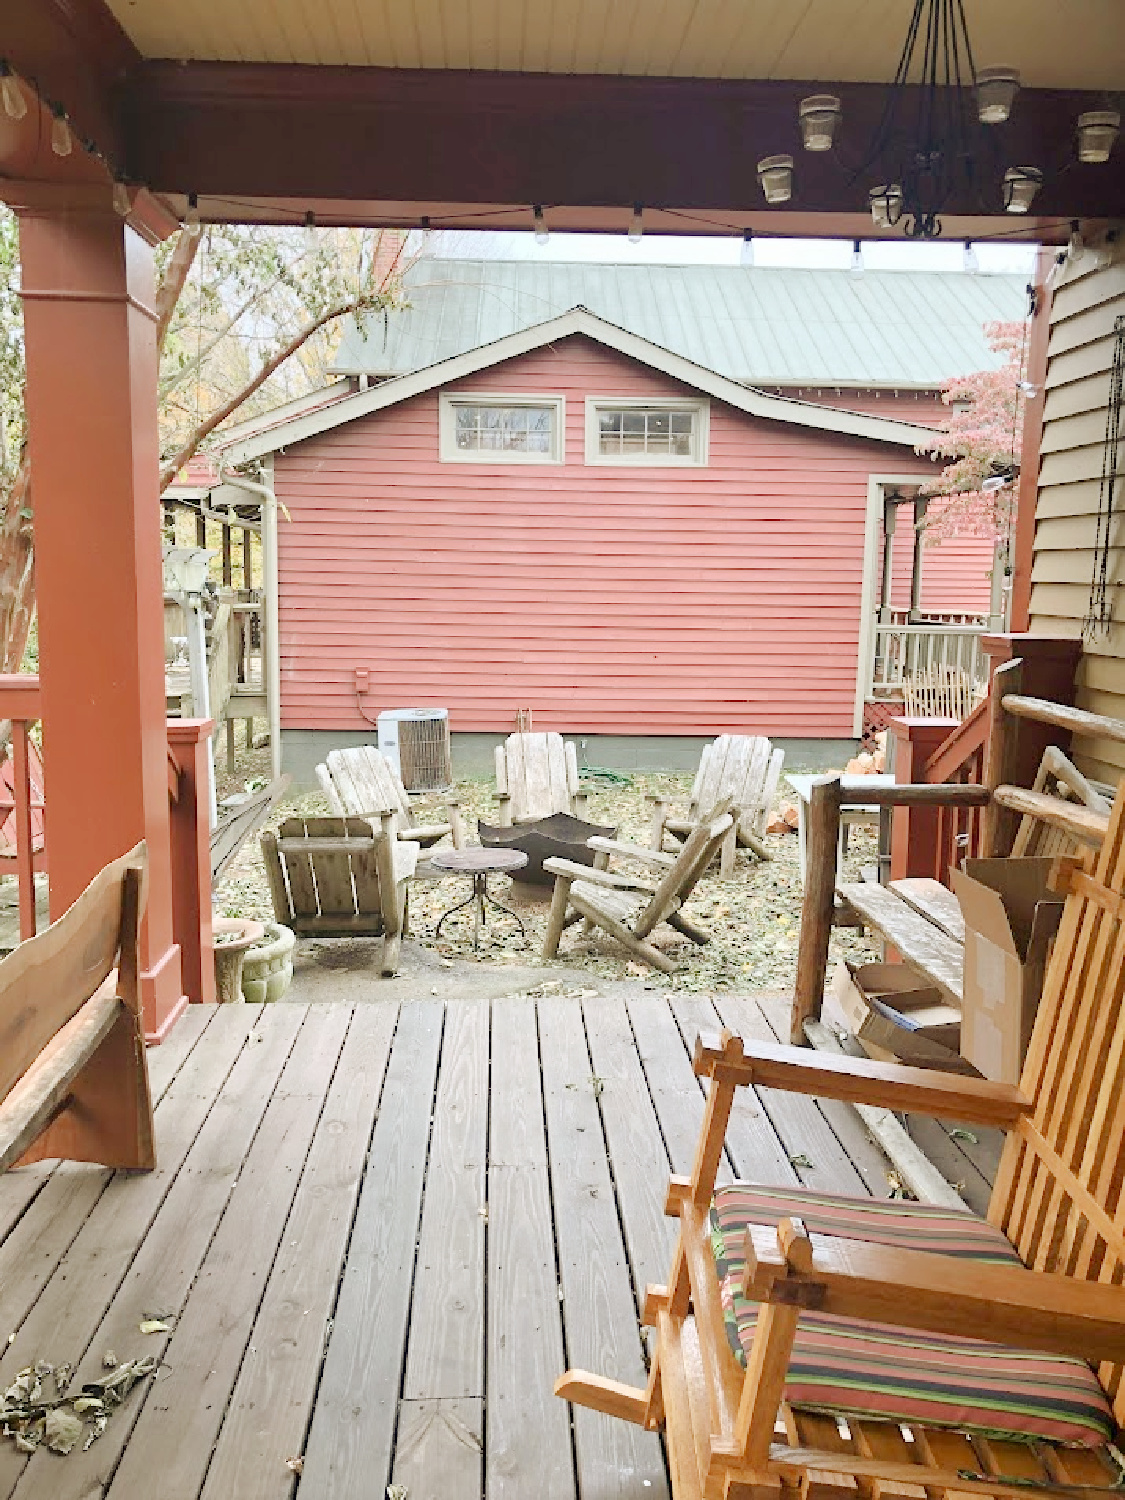 Back porch and nearby firepit overlooking creek at Creekside Trading in Leiper's Fork, TN - Hello Lovely Studio.